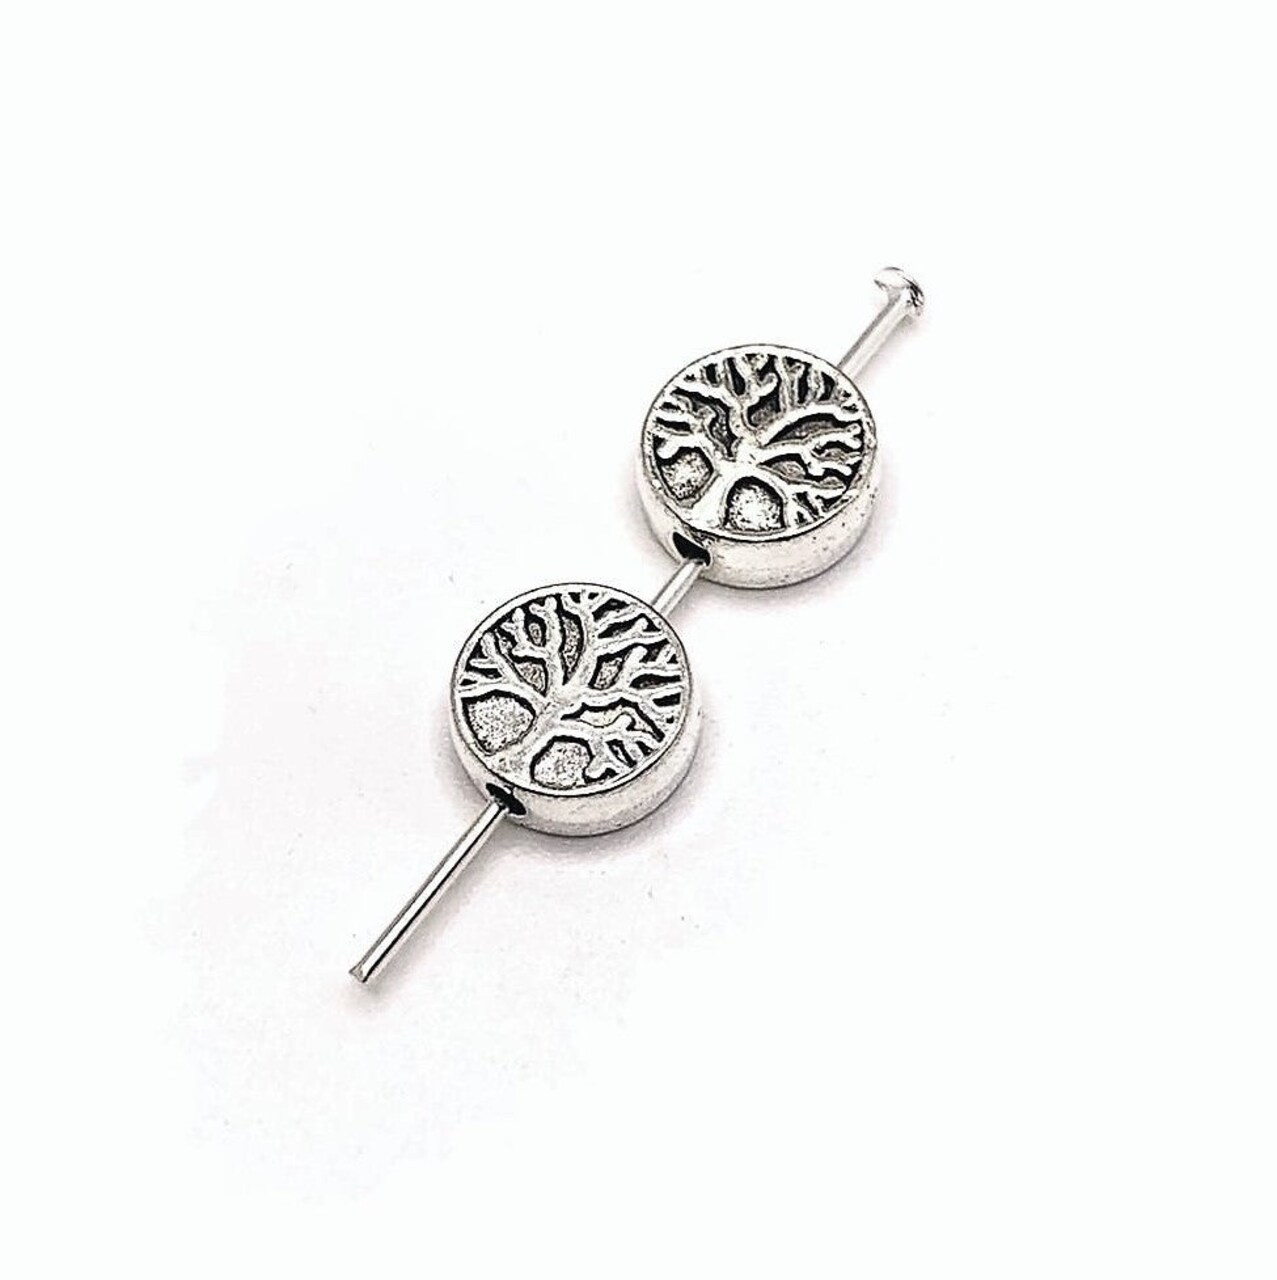 4, 20 or 50 Pieces: Silver Round Tree of Life Spacer Charm Beads - Double Sided